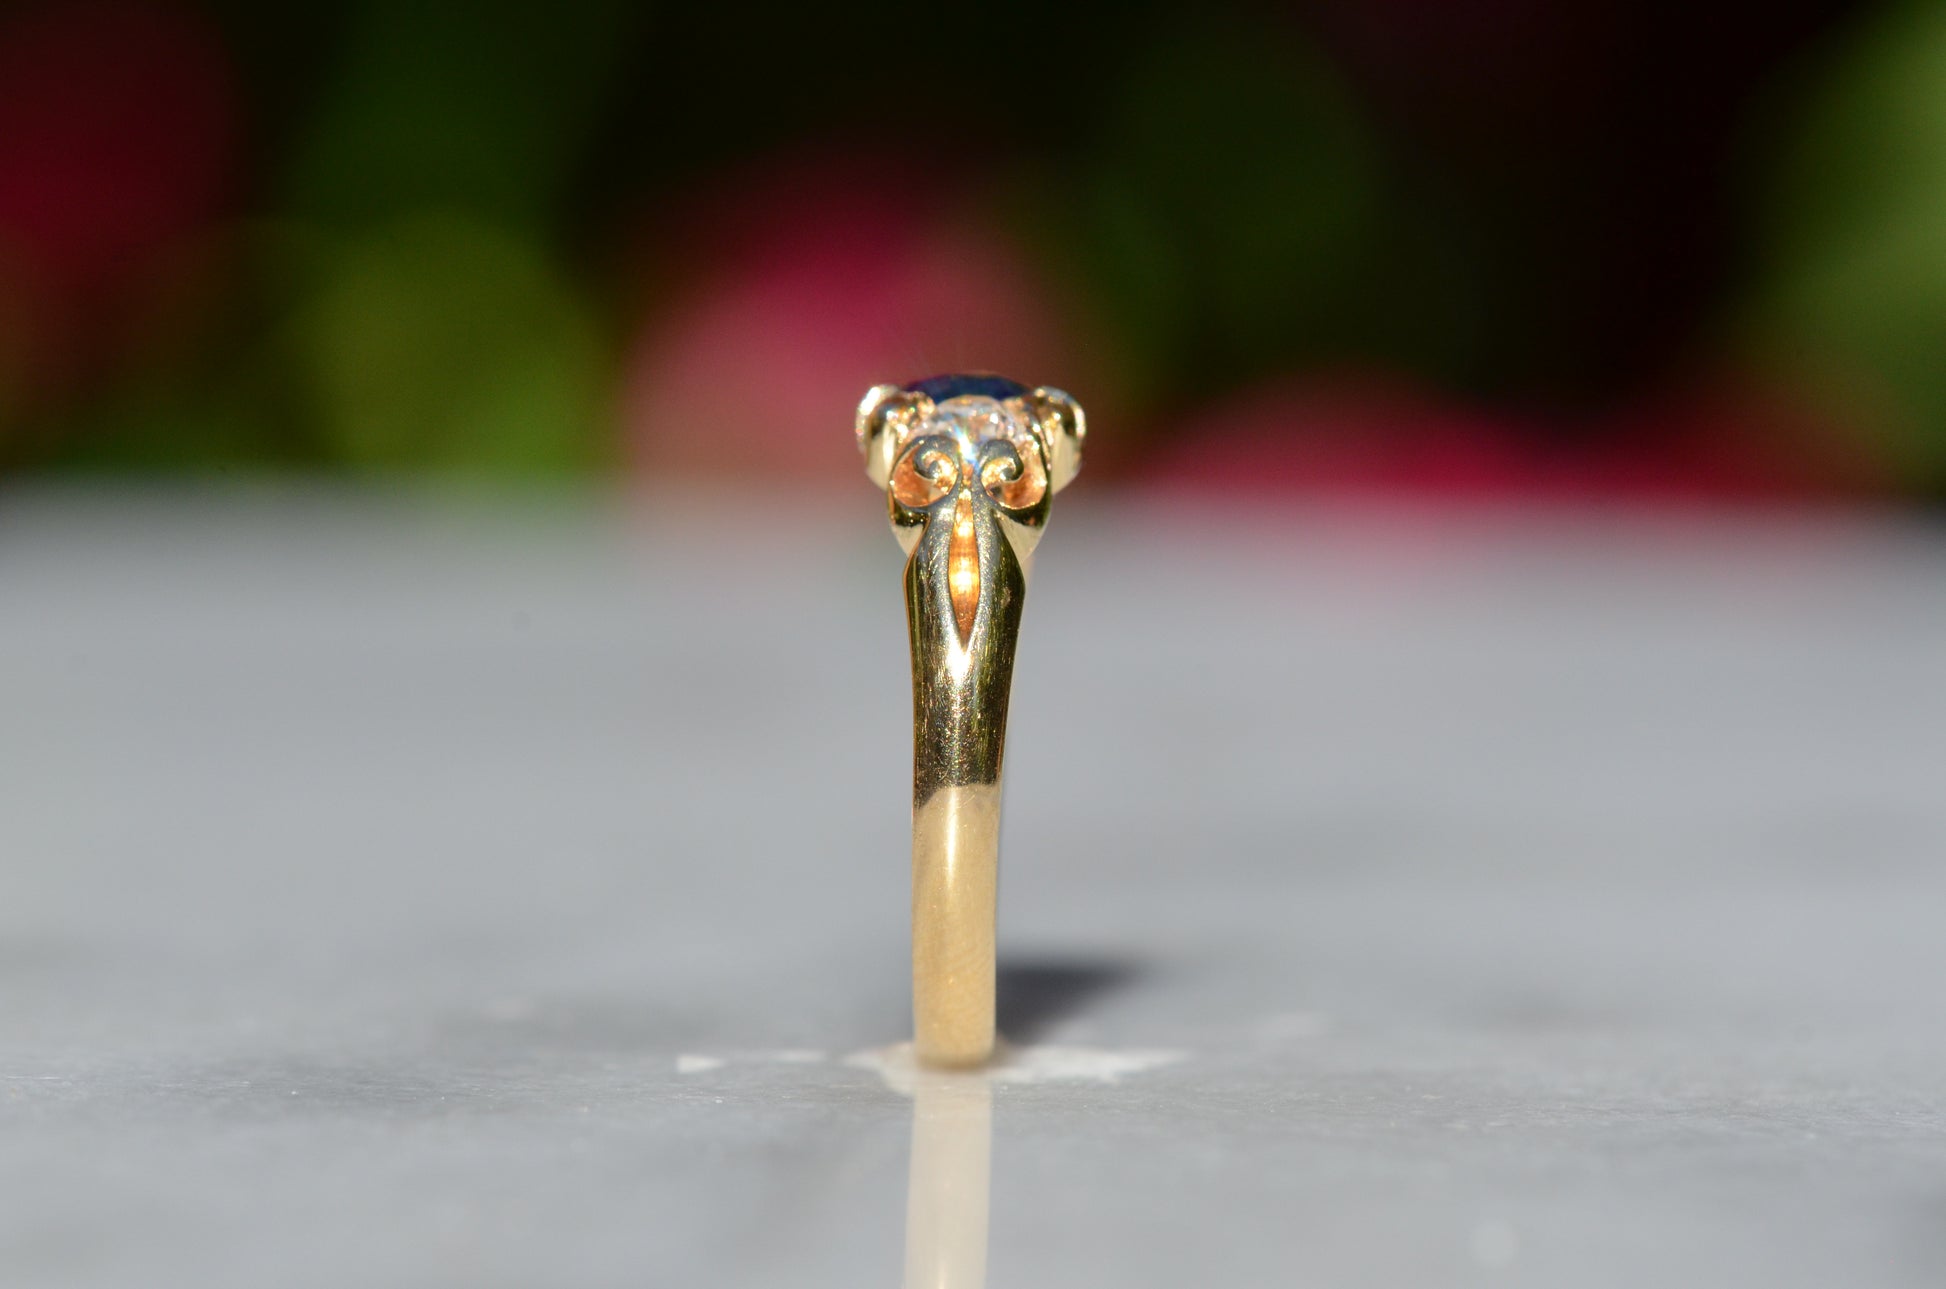 A Victorian ring in yellow gold with swirling shoulders and a central vivid blue sapphire flanked by a pair of old mine cut diamonds, photographed upright and from the side, to showcase the profile of the ring.